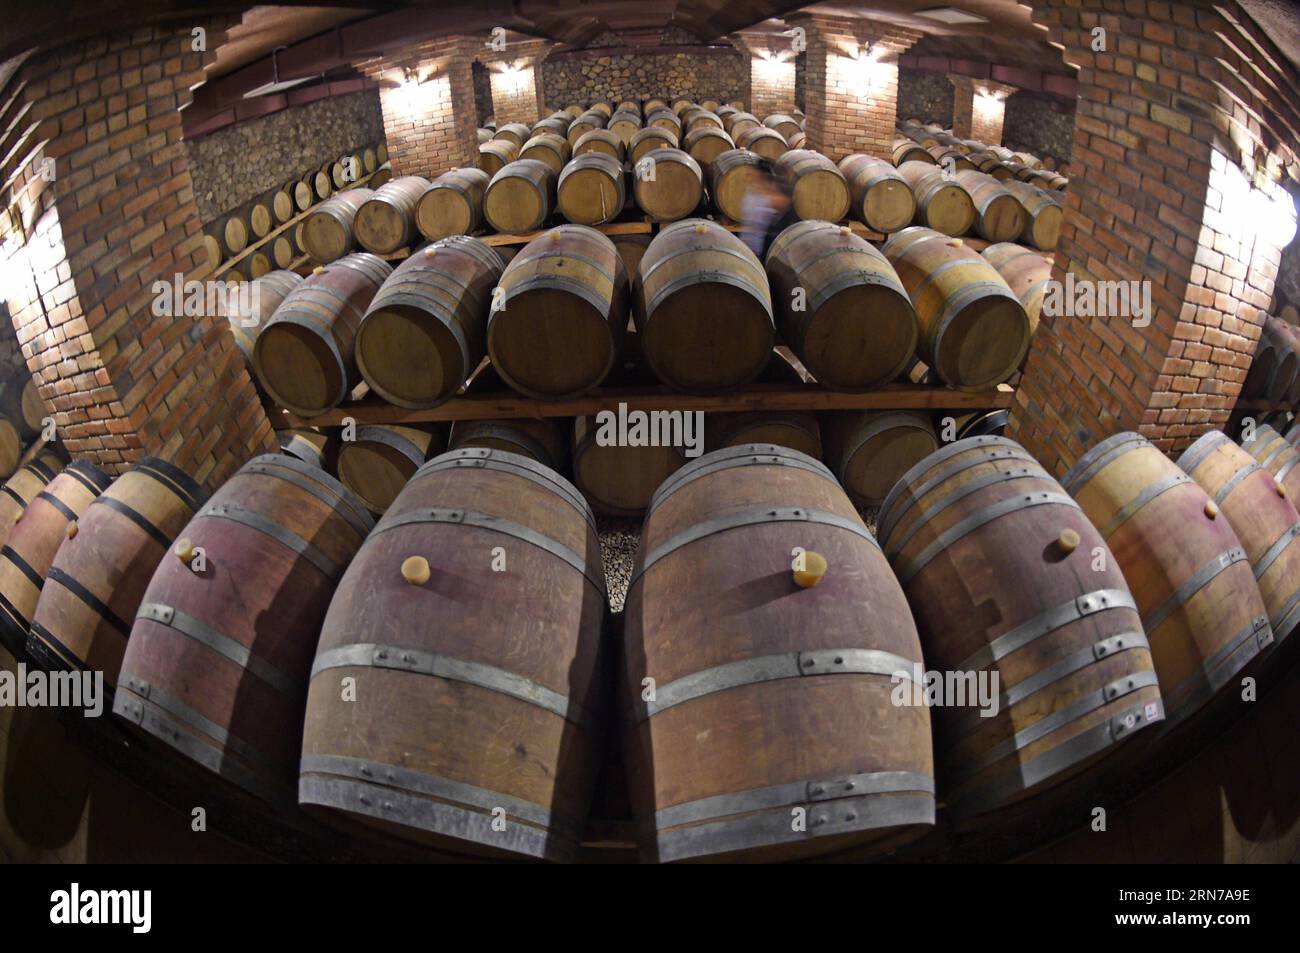 Photo taken on Aug. 28, 2015 shows a wine cellar of a chateau at the eastern foot of Helan Mountain, northwest China s Ningxia Hui Autonomous Region. Many chateaus at the eastern foot of Helan Mountain, a golden belt for planting grapes, developed their tourism by attracting tourists with chateau cultures. Ningxia region, which has 590,000 mu (39,333 hectares) of vineyards, has planned to build 10 vineyard towns and more than 100 large-scale chateaus by 2020. ) (lfj) CHINA-NINGXIA-CHATEAU TOURISM (CN) WangxPeng PUBLICATIONxNOTxINxCHN   Photo Taken ON Aug 28 2015 Shows a Wine cellar of a Chatea Stock Photo